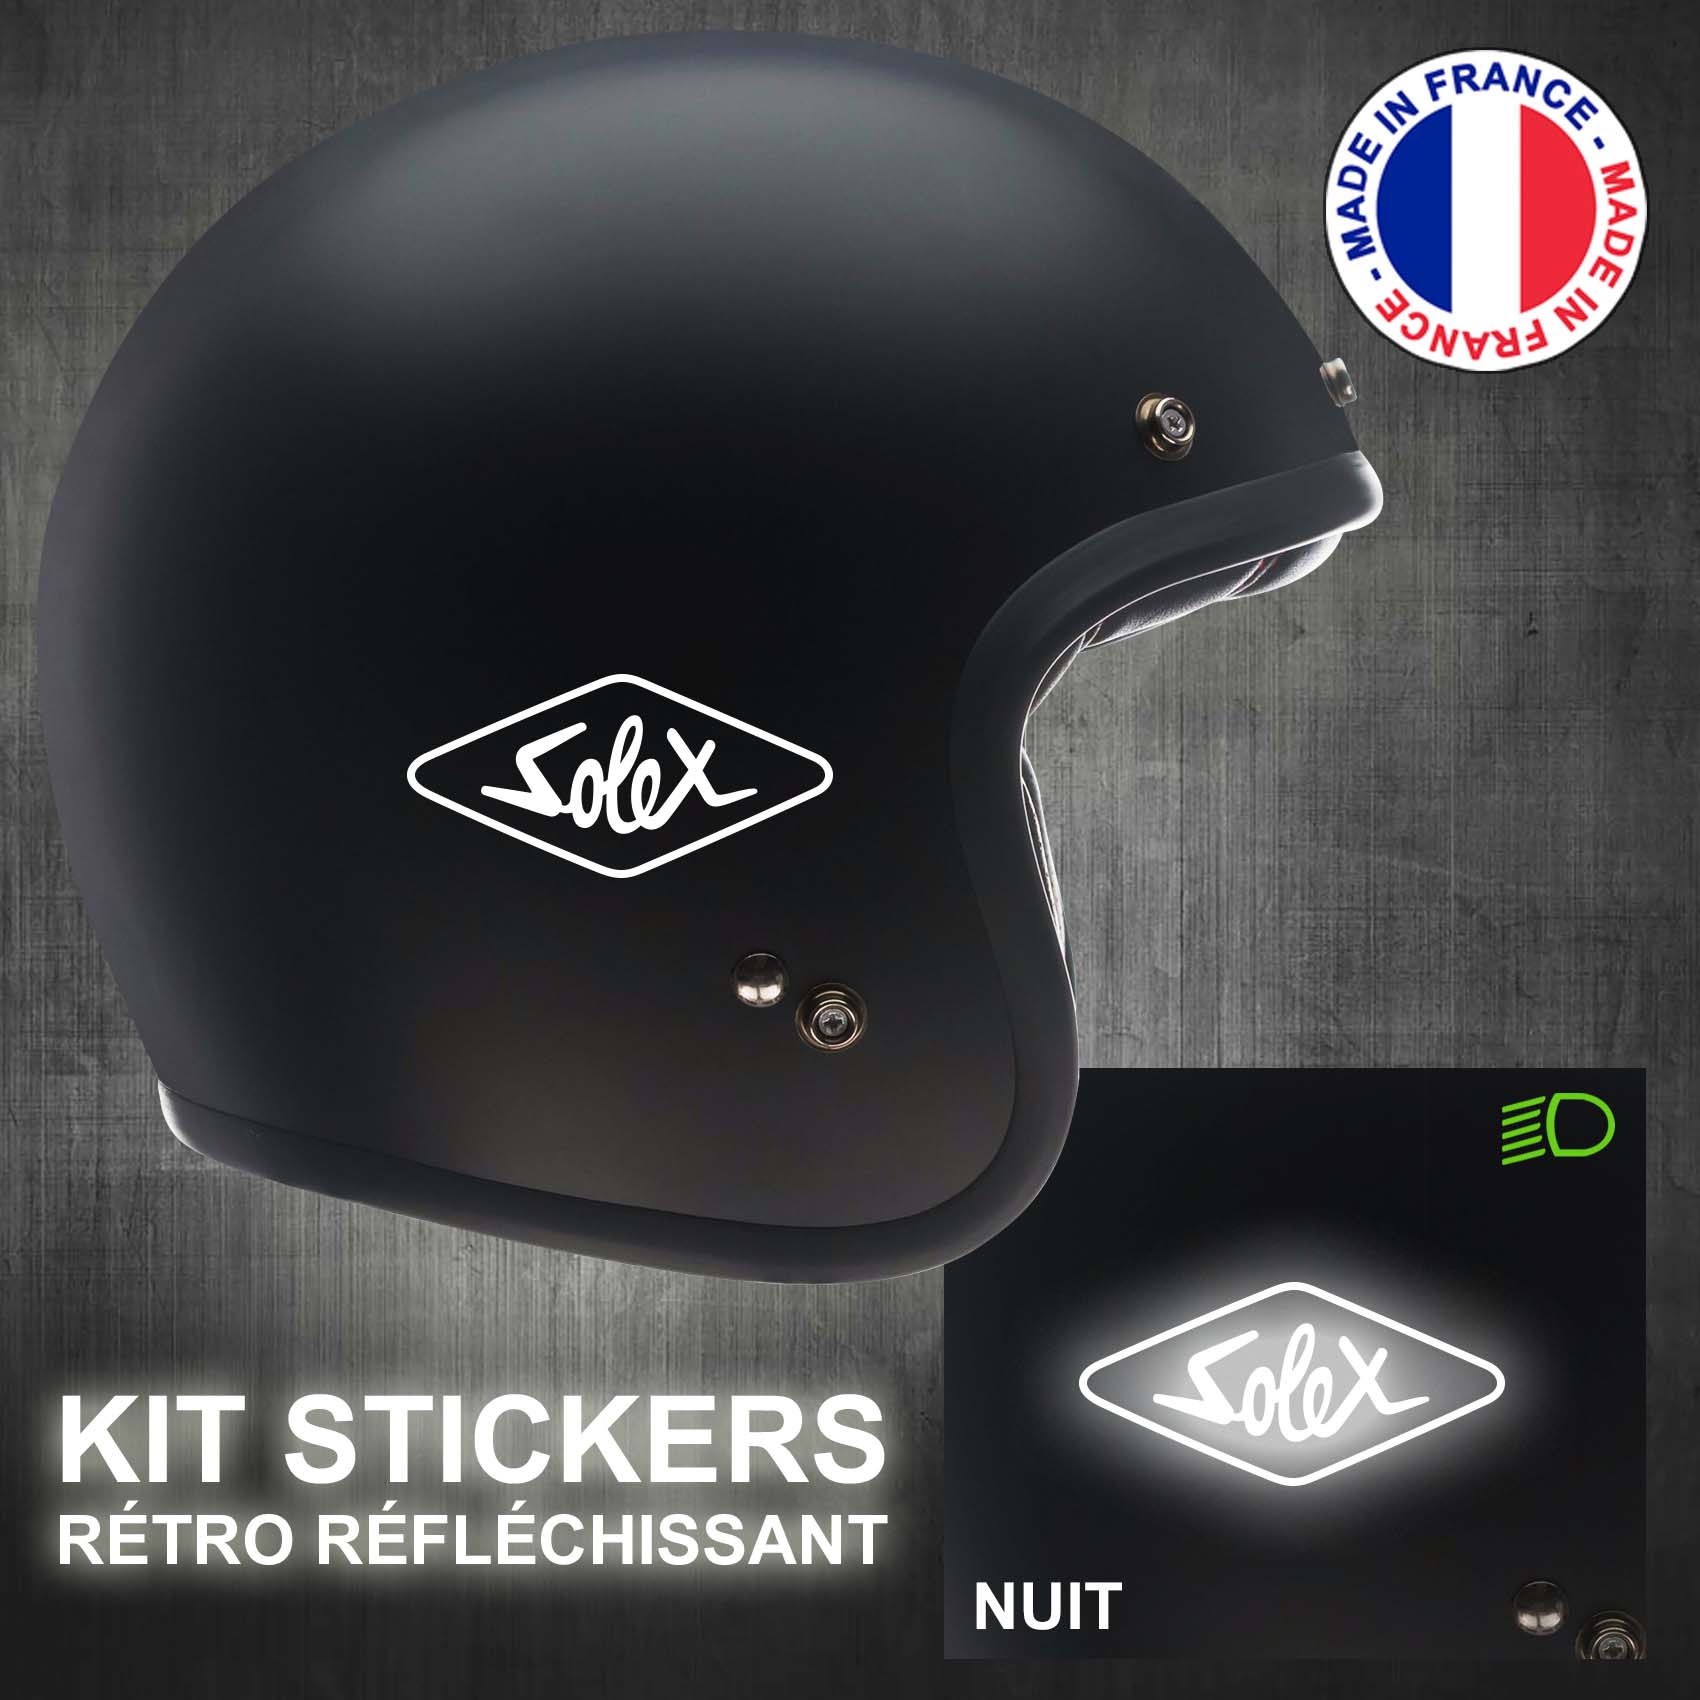 stickers-casque-moto-solex-ref2-retro-reflechissant-autocollant-noir-moto-velo-tuning-racing-route-sticker-casques-adhesif-scooter-nuit-securite-decals-personnalise-personnalisable-min